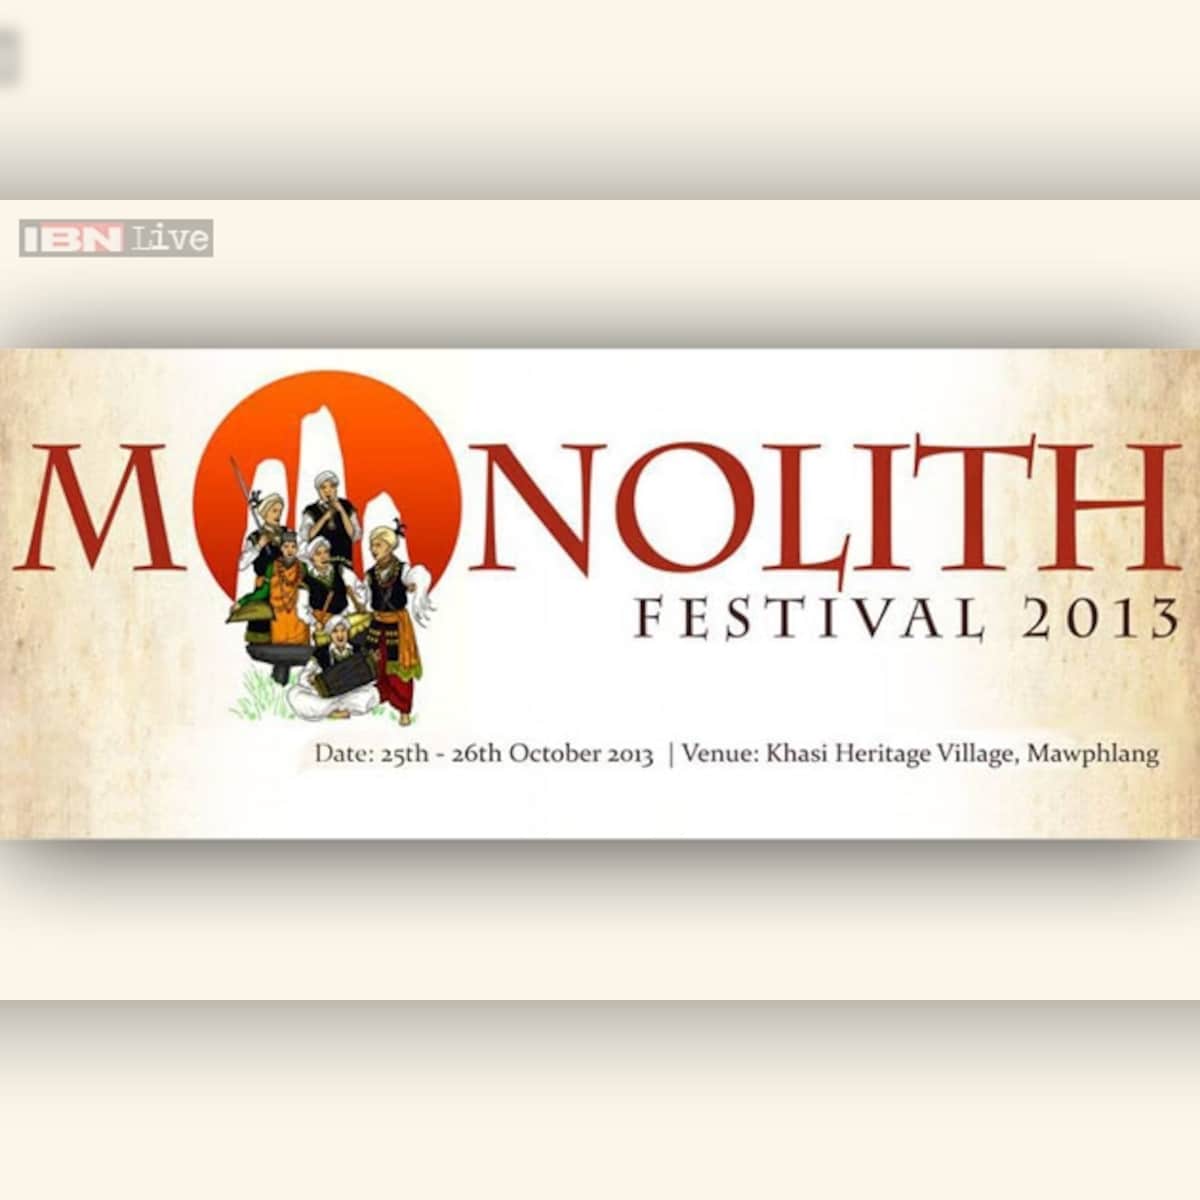 Meghalaya's first-ever Monolith Festival begins on October 25